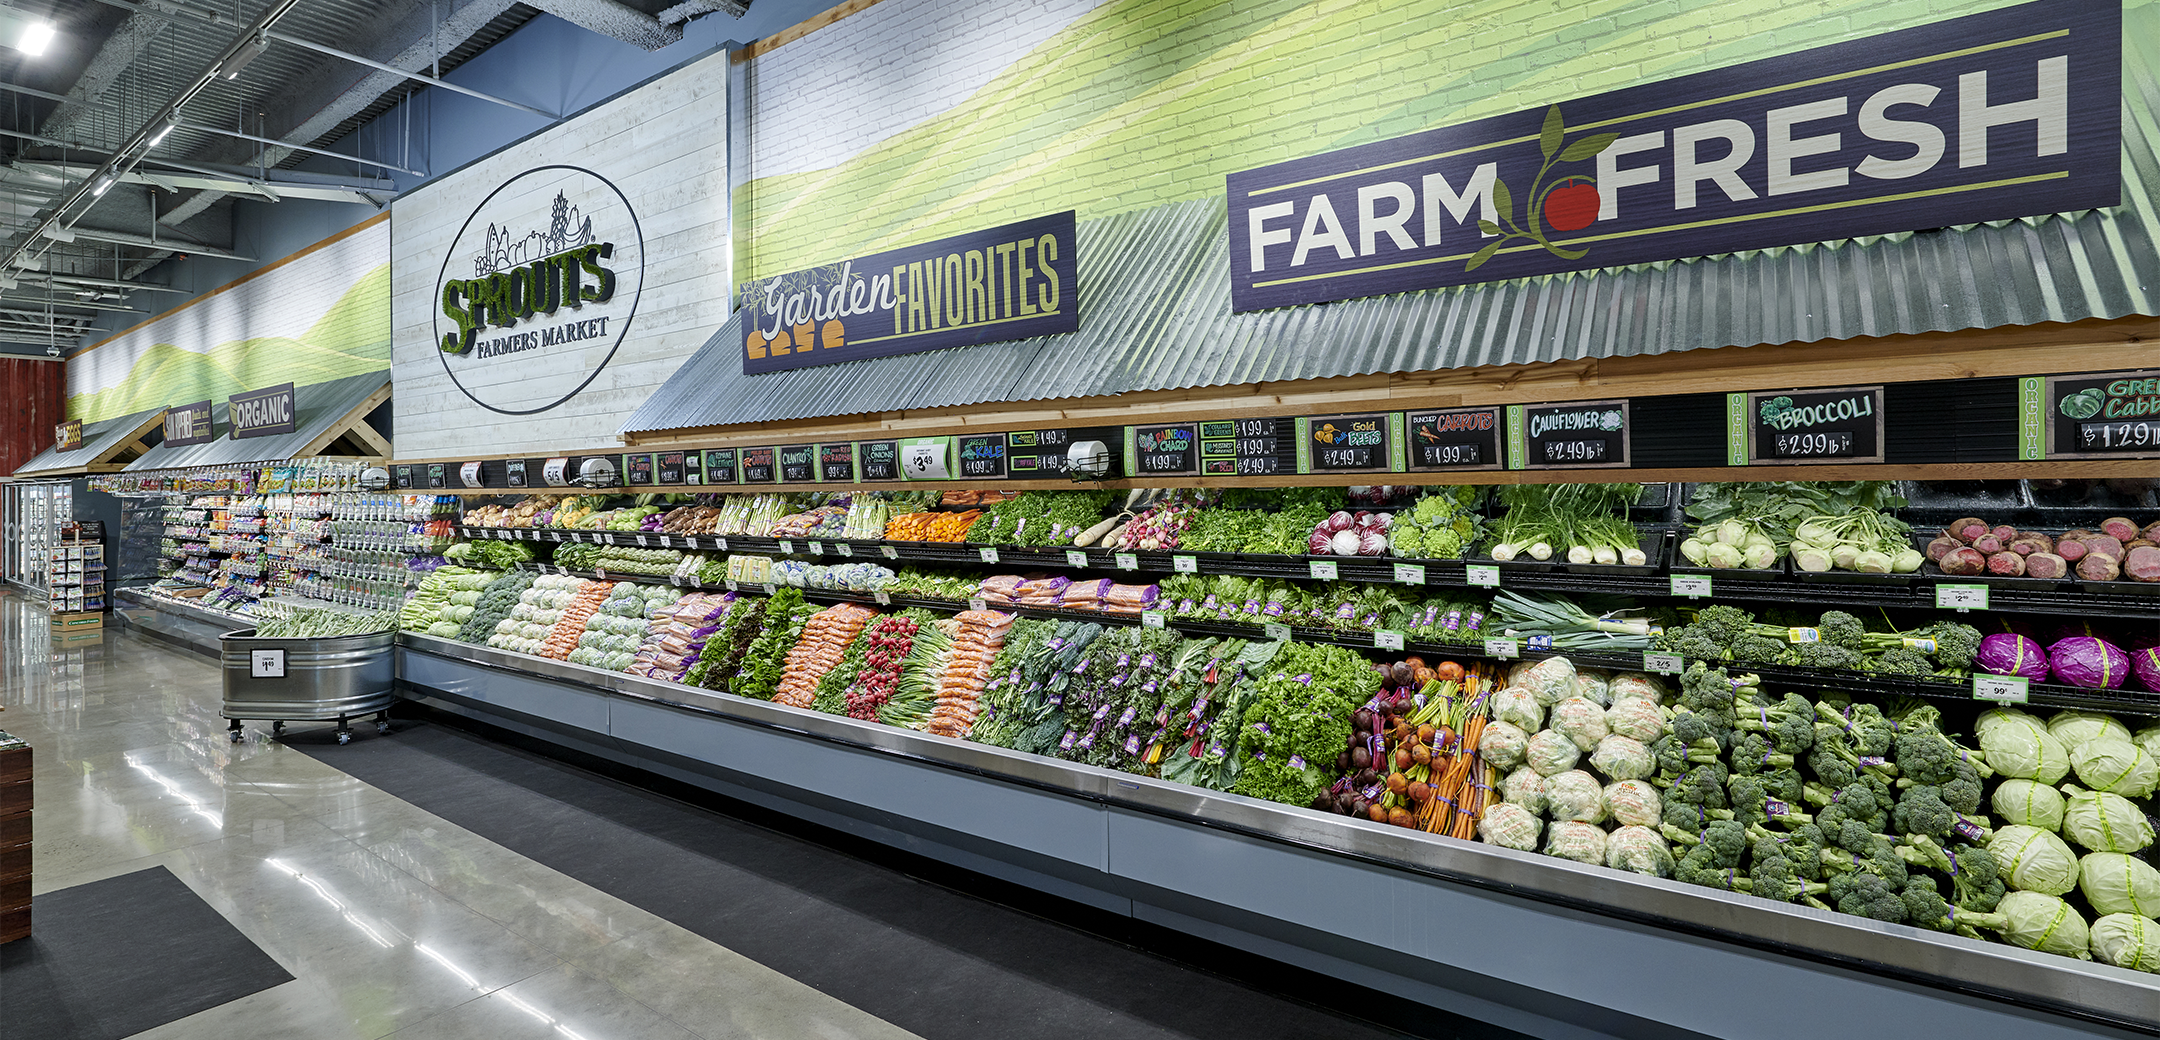 A close up view of the Sprouts Farmers Market interior brick decorative wall with "Farm Fresh" signage and vegetables on the refrigerated shelves along the wall.